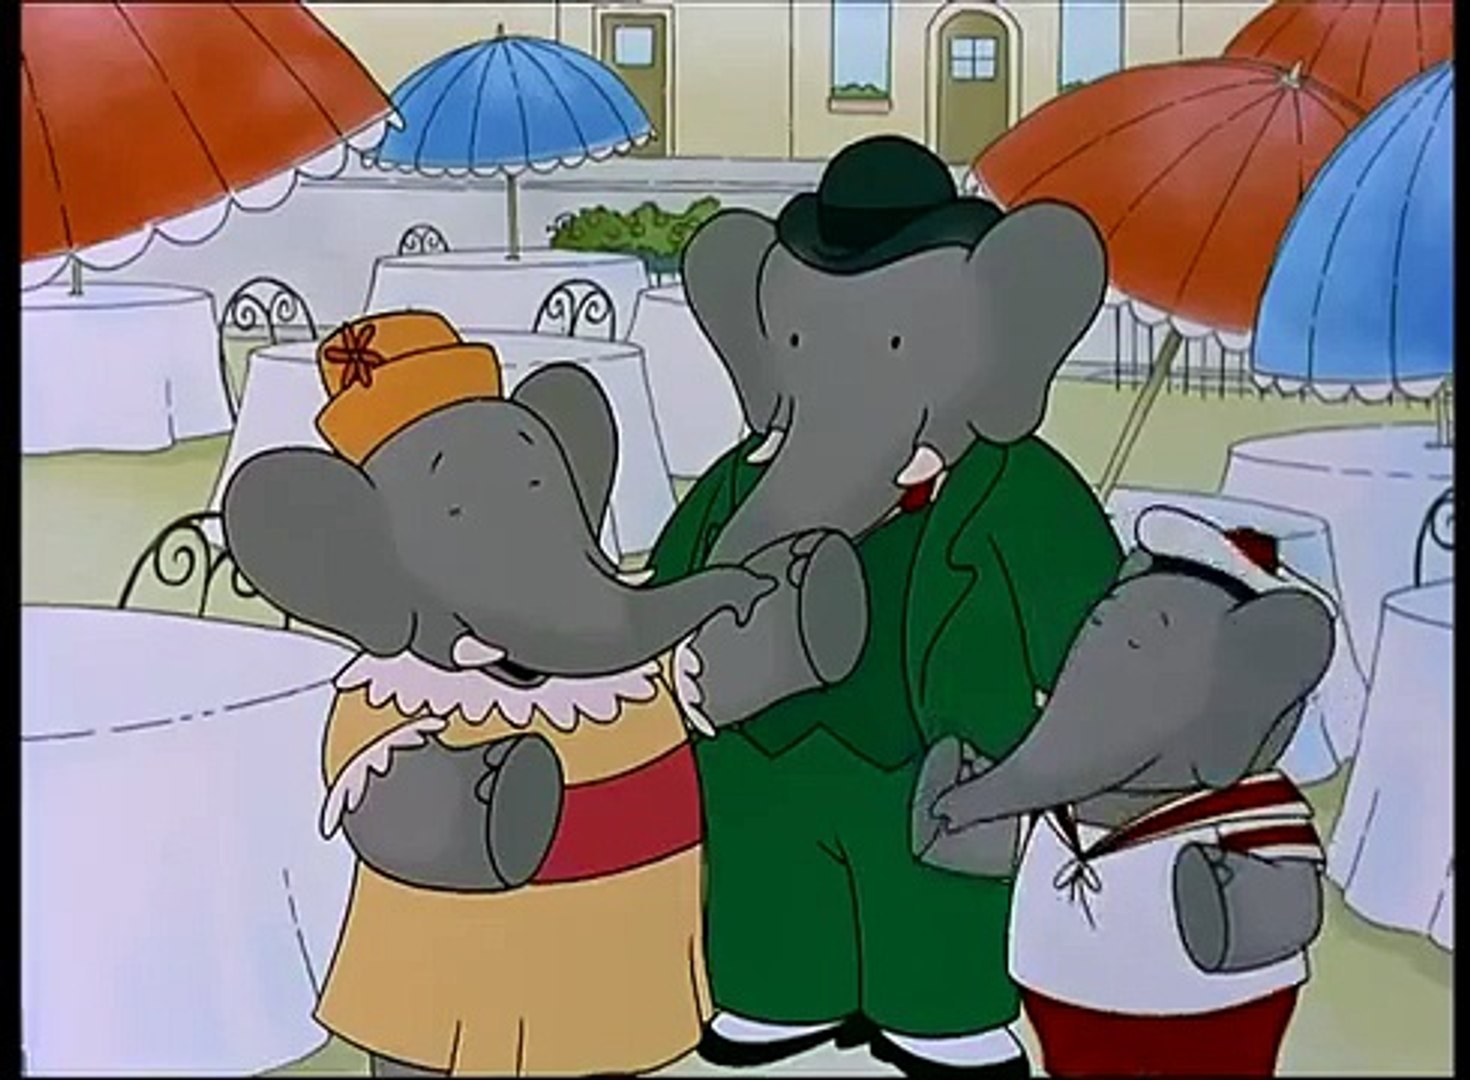 The return - Babar, King of the Elephants - Dailymotion Video